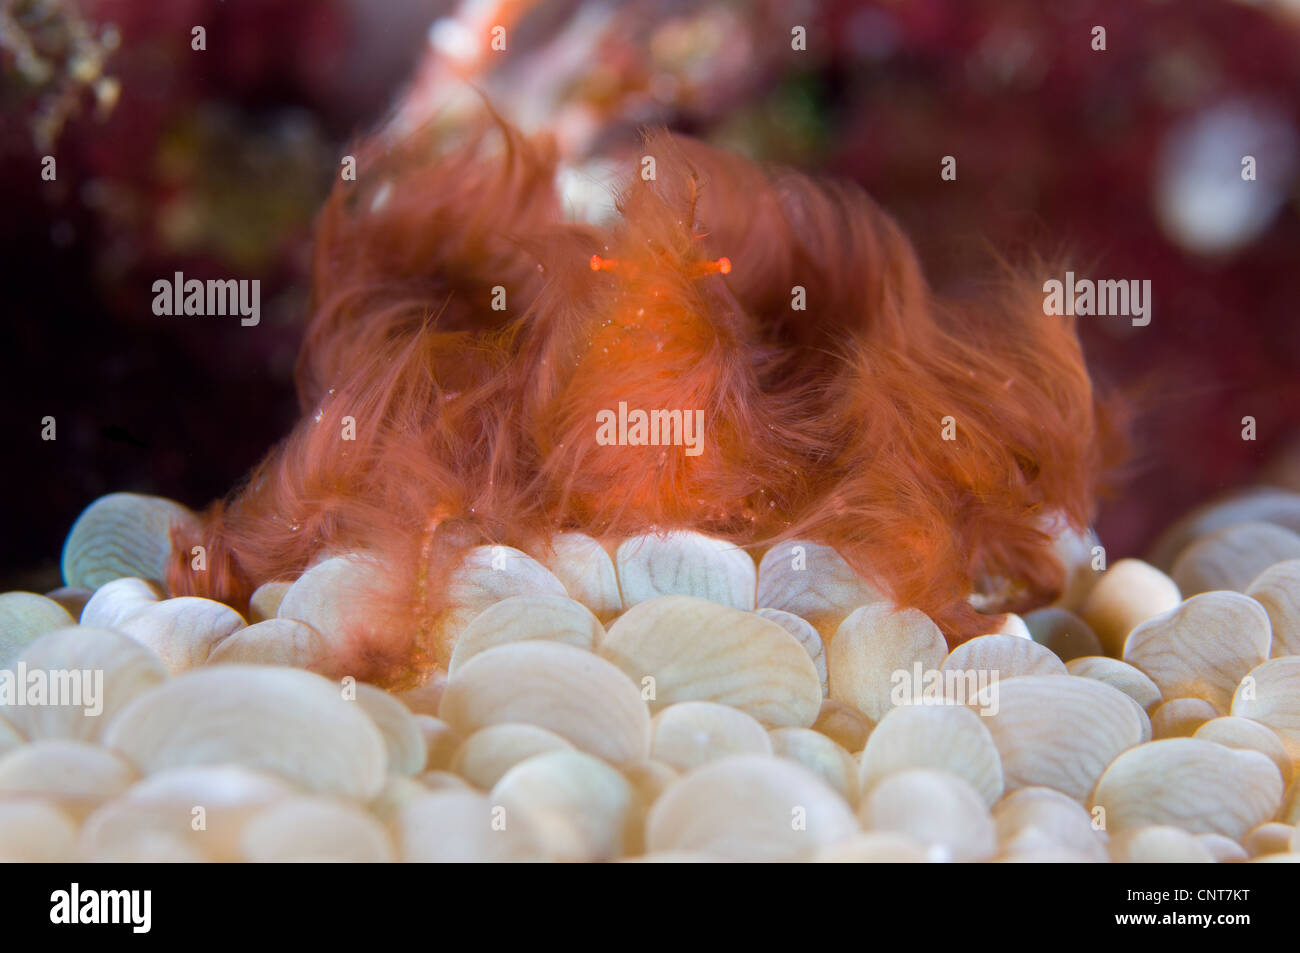 The Orang-utan decorator crab sitting on coral, Russell Islands, Solomons. Stock Photo